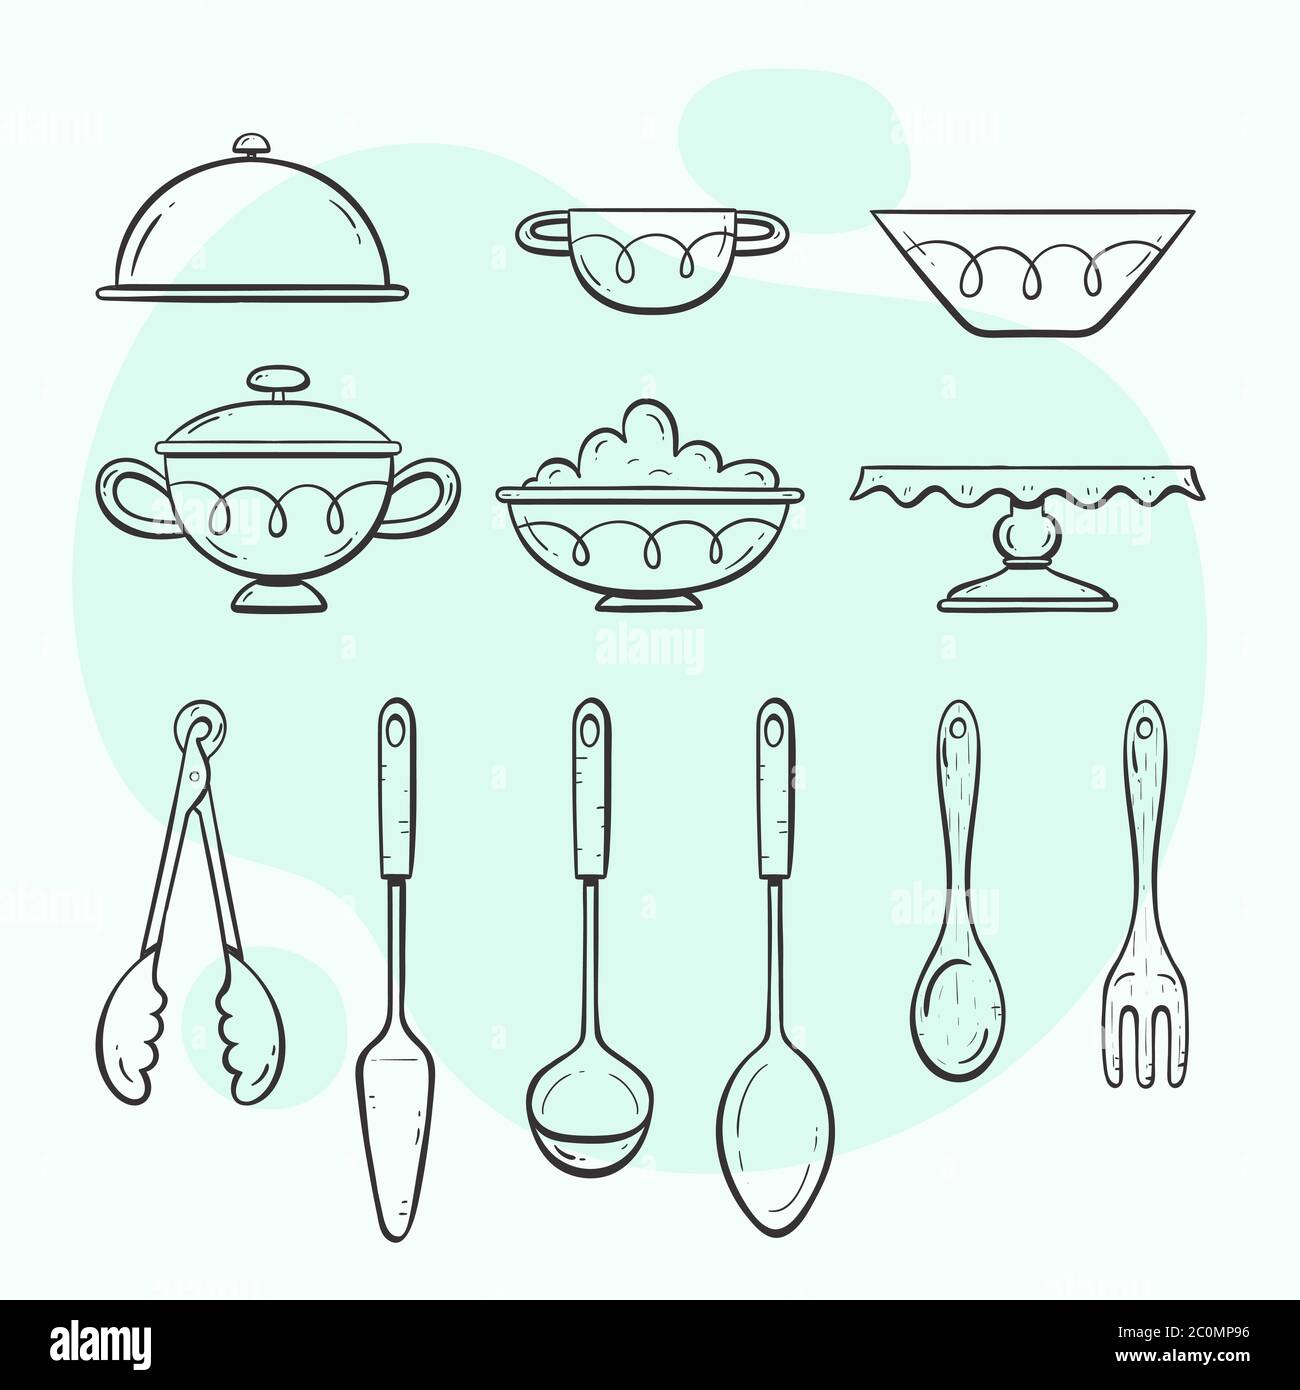 https://c8.alamy.com/comp/2C0MP96/kitchen-utensils-collection-of-objects-for-serving-food-doodle-outlined-style-collection-2C0MP96.jpg